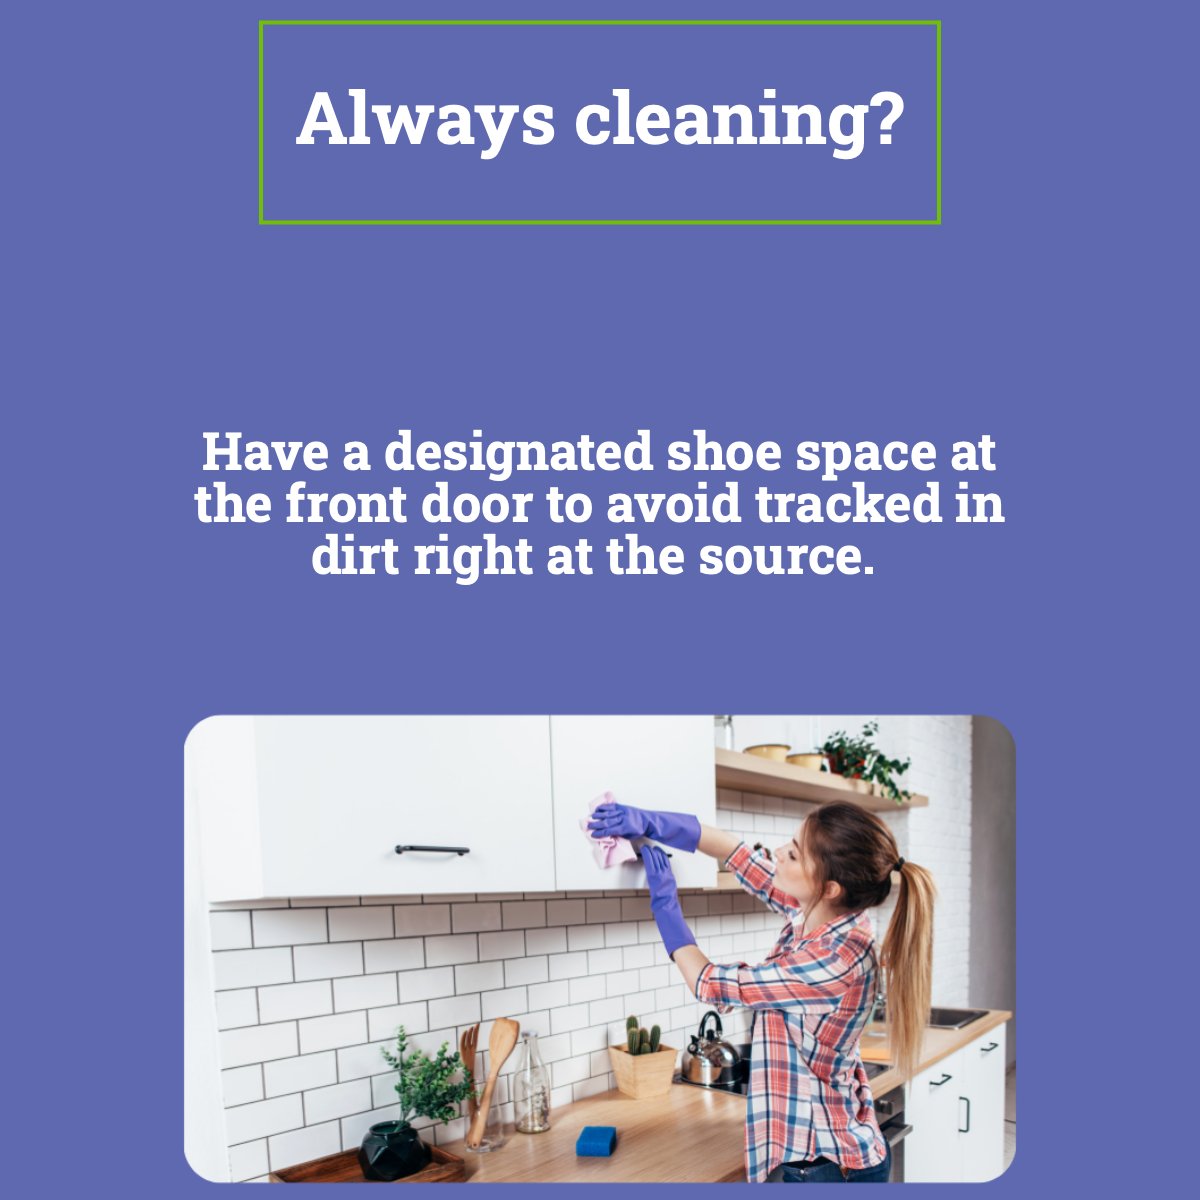 If you are tired of cleaning all the time, try this tip! 💡

#cleaningtips #cleanhouse #cleaninghacks #cleanhome